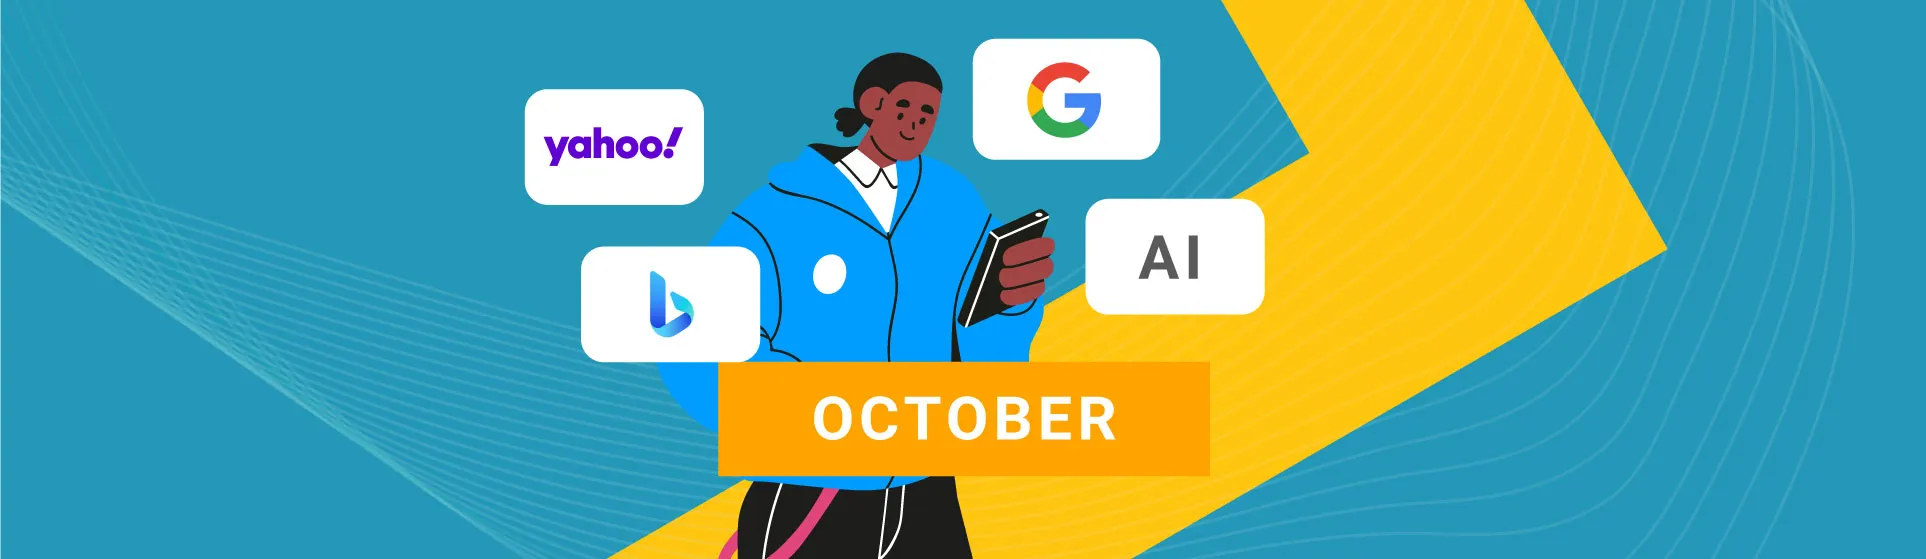 Google Search Updates – October ’21 Changes